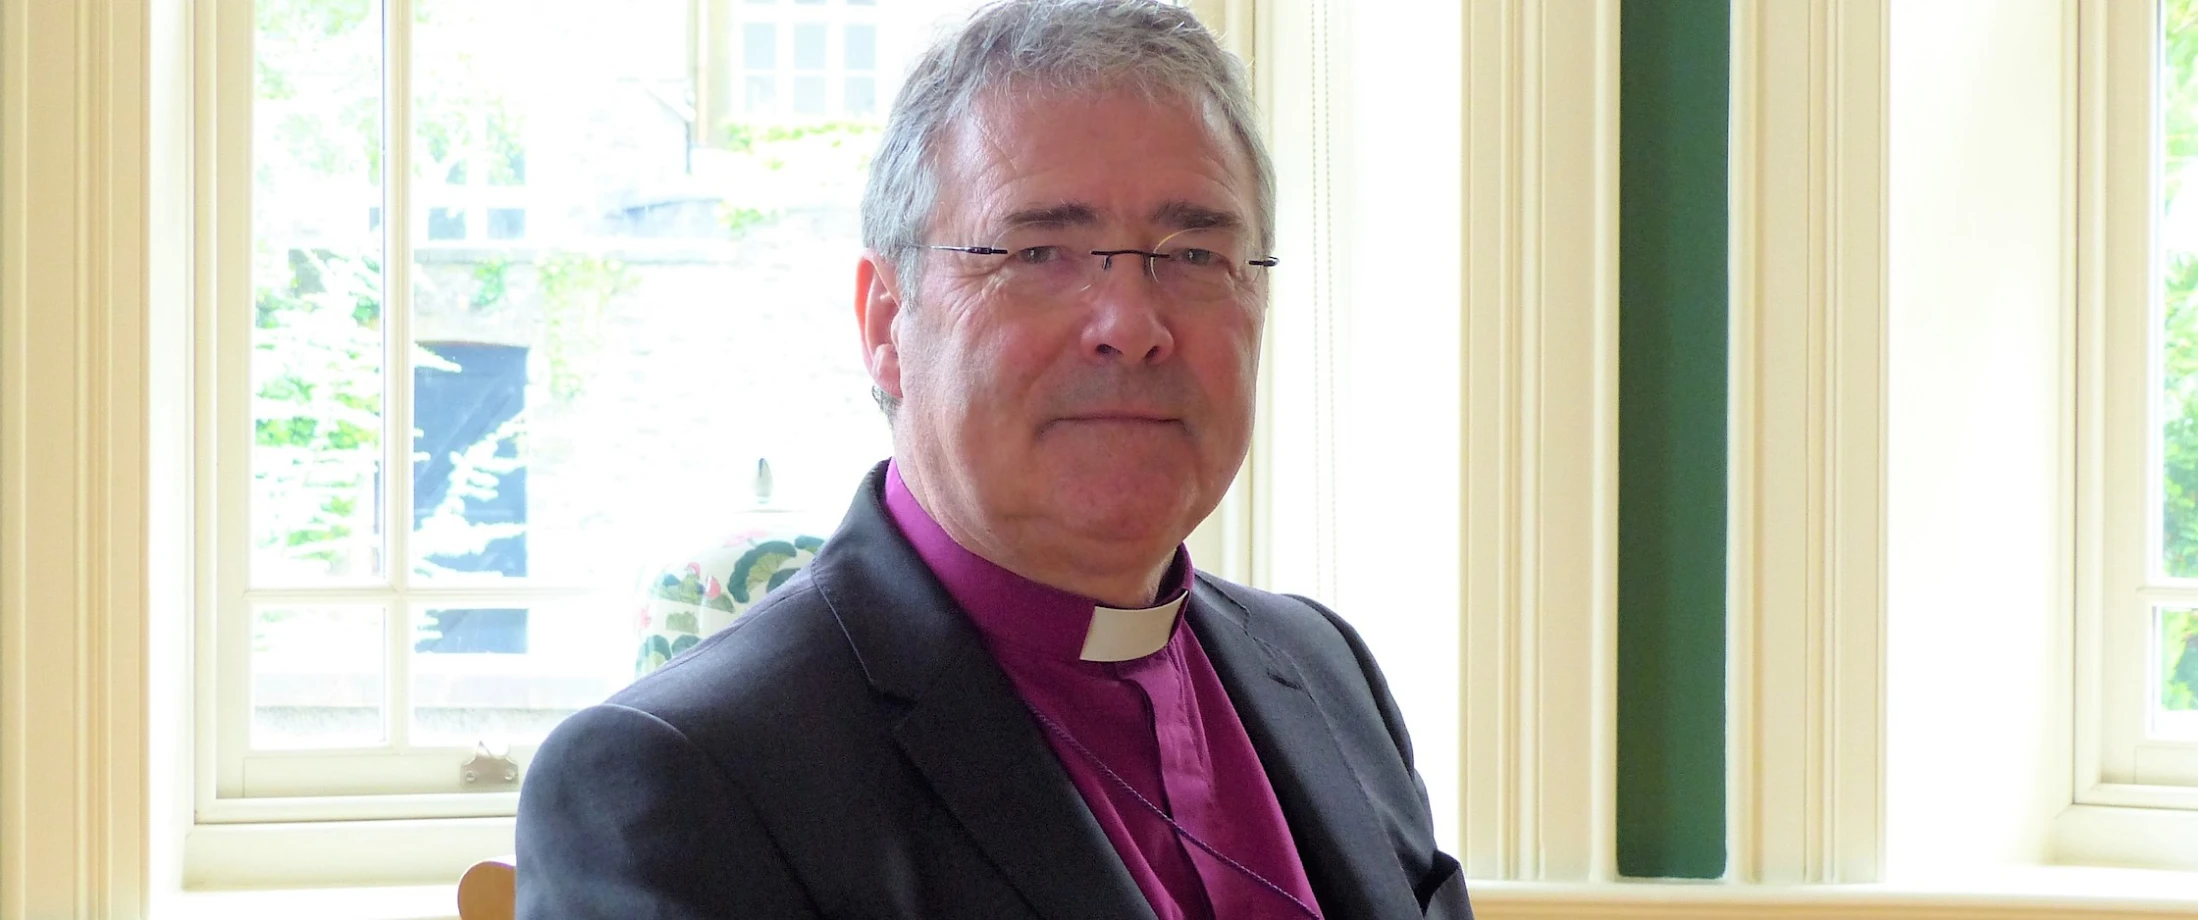 Archbishop of Armagh calls for balanced decisions